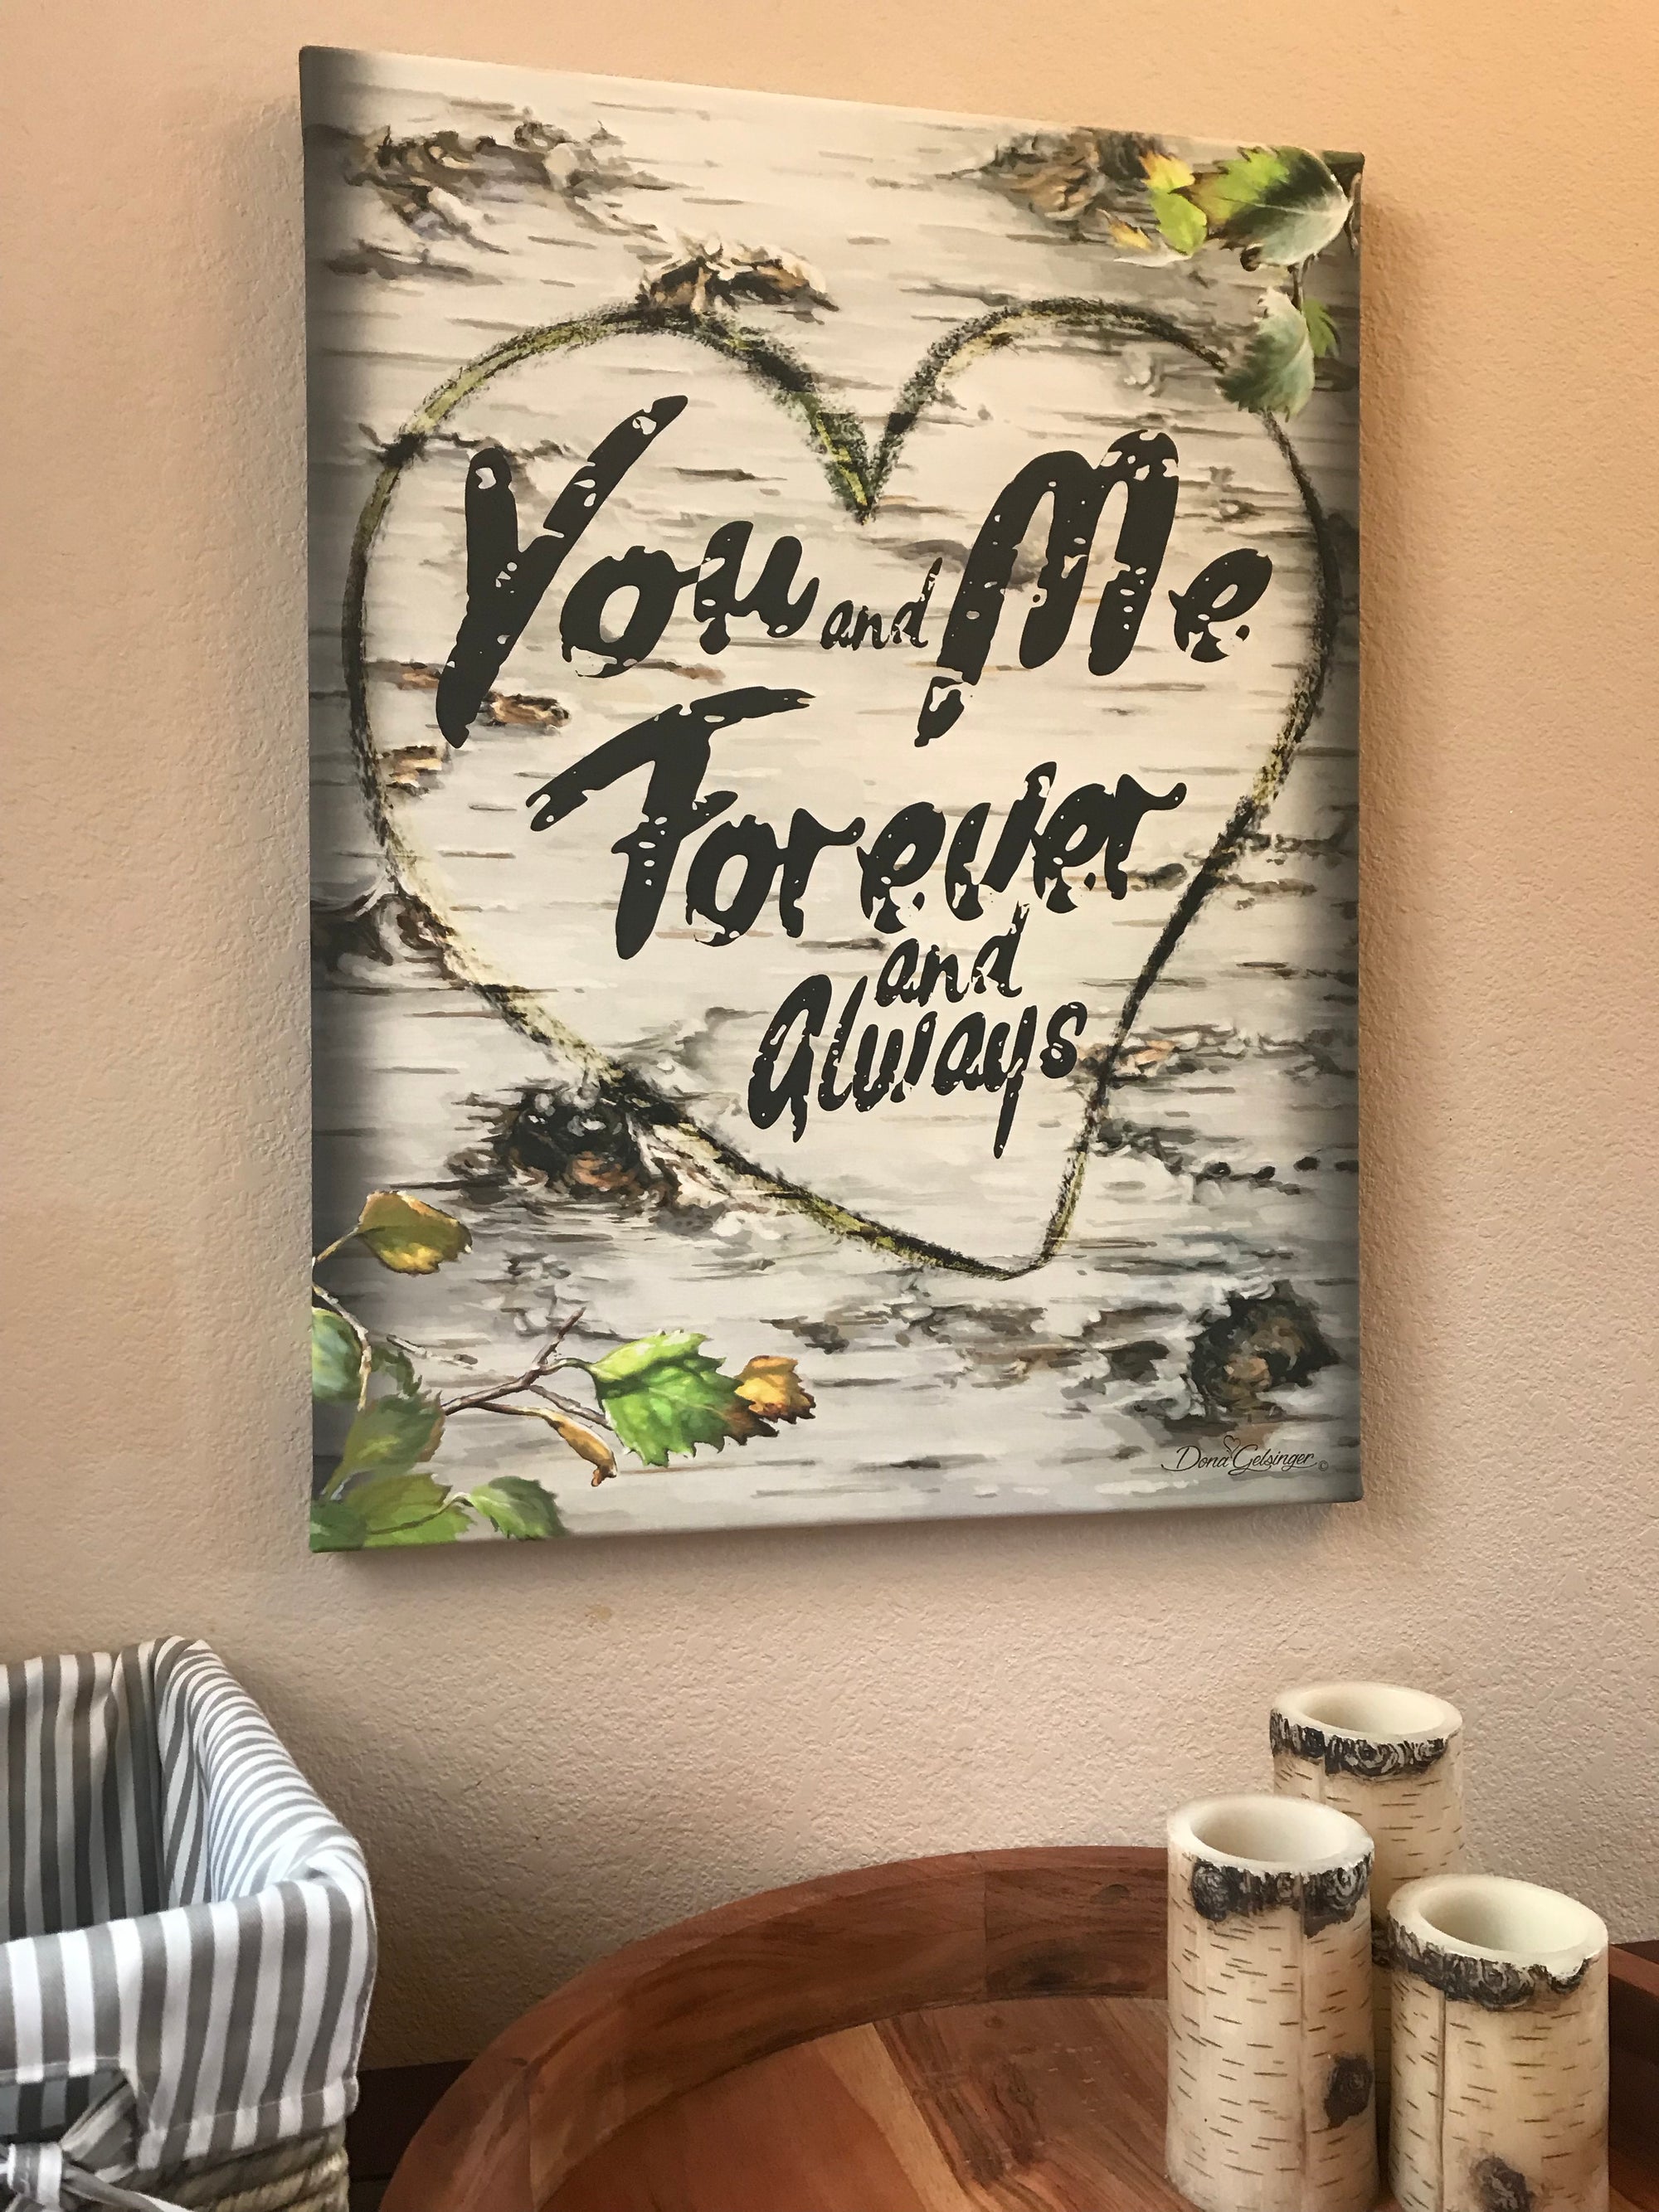 This exquisite piece portrays a beautiful birch tree trunk with a heart deeply engraved into it, symbolizing the unbreakable bond between two souls. Inside the heart, the words "you and me forever and always" are inscribed in elegant, flowing script, perfectly encapsulating the deep commitment and unwavering devotion shared by true lovers.